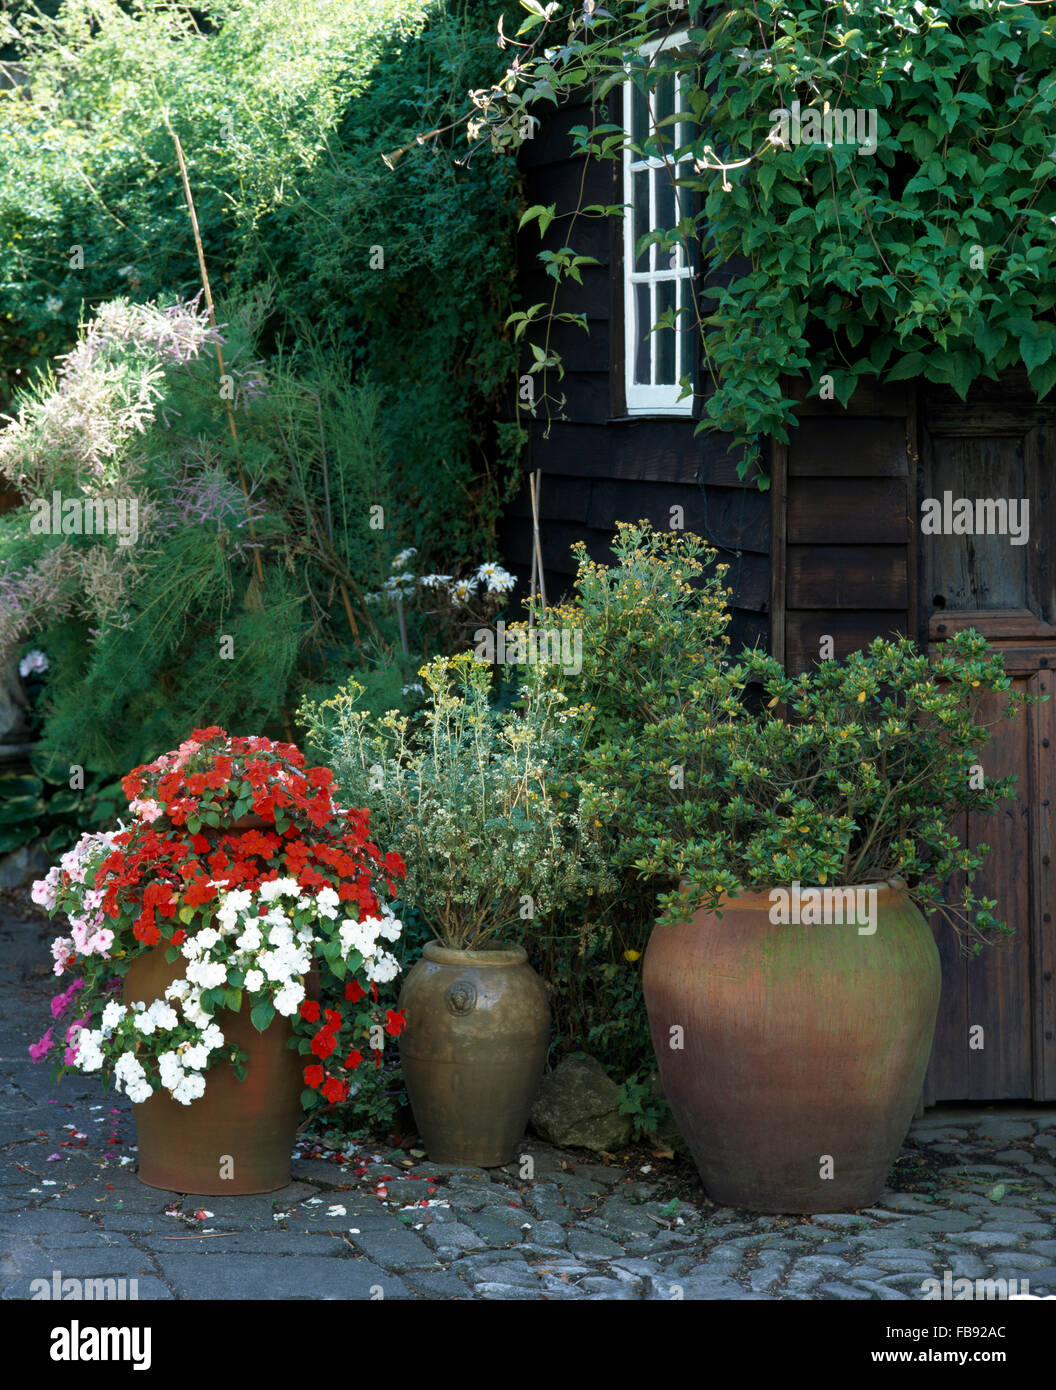 Red and white impatiens in a terracotta pot beside pots of small shrubs outside a small cottage Stock Photo